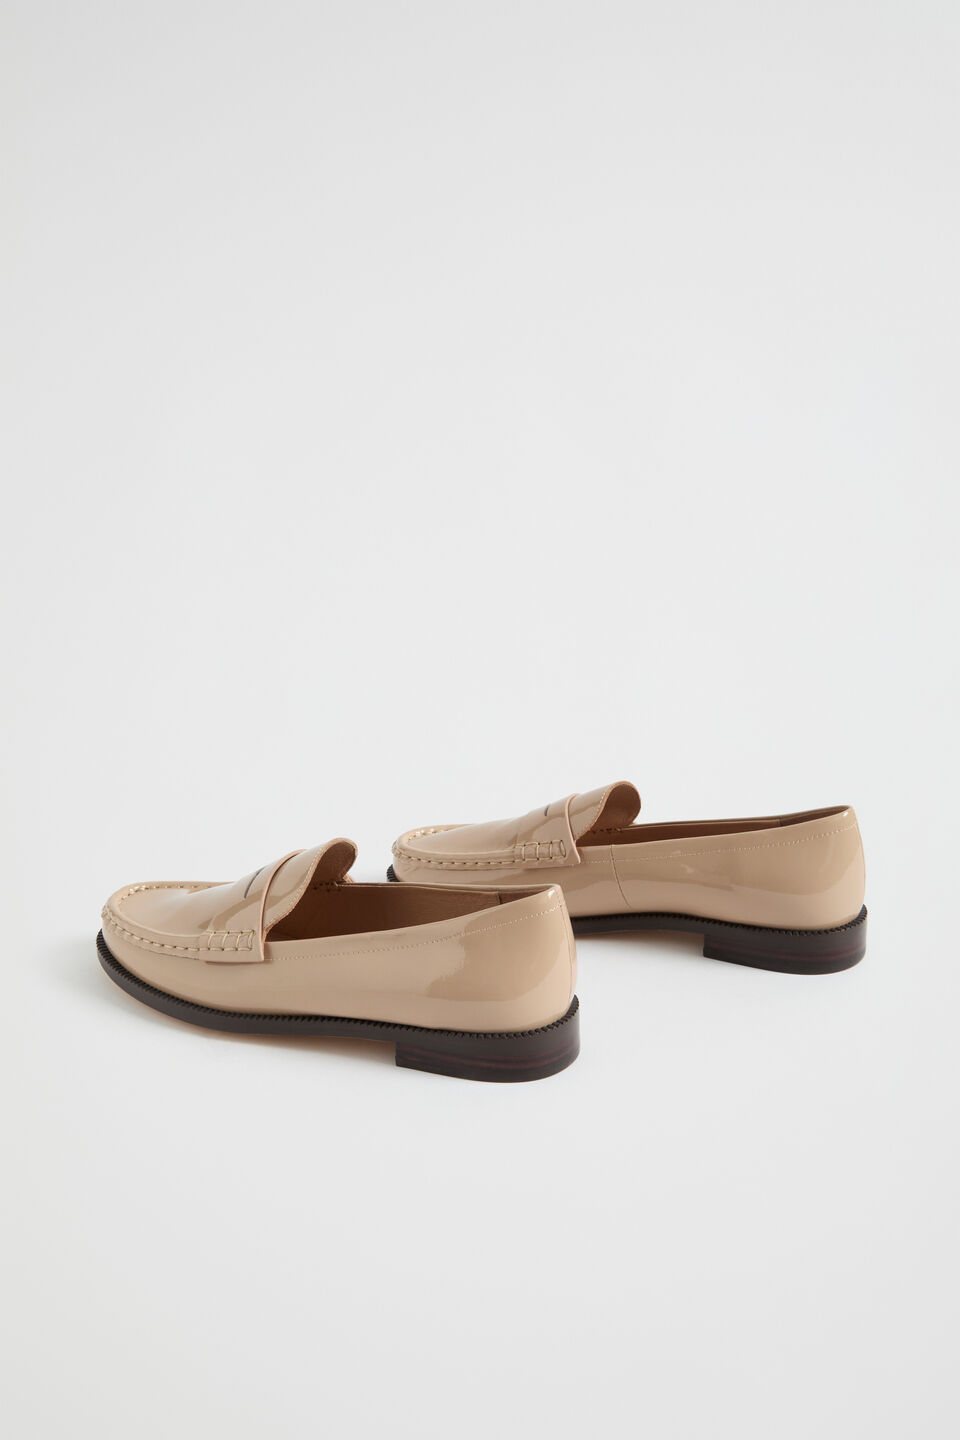 Kendall Loafer  Nude Patent